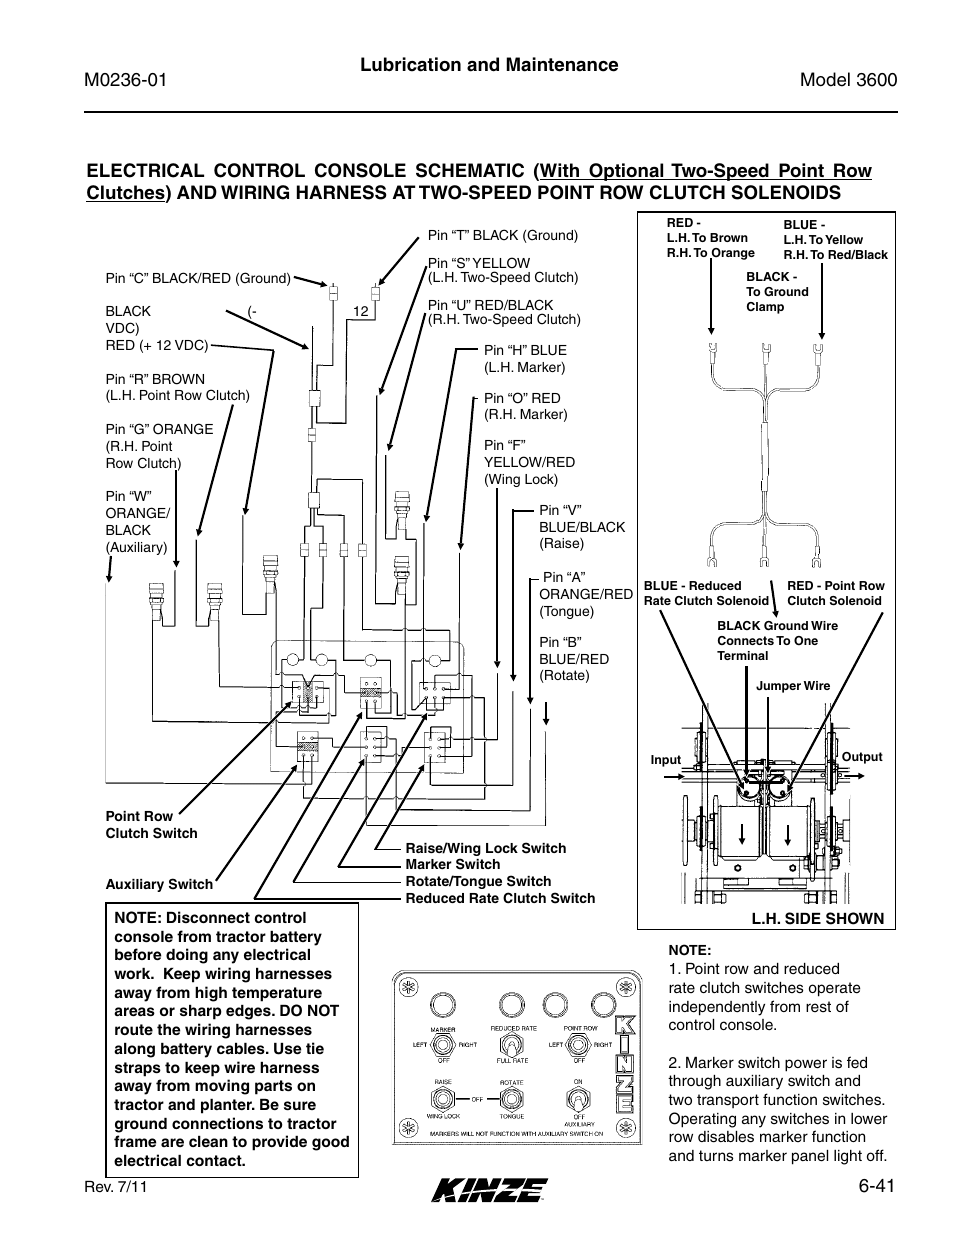 41 lubrication and maintenance | Kinze 3600 Lift and Rotate Planter Rev. 7/14 User Manual | Page 149 / 172